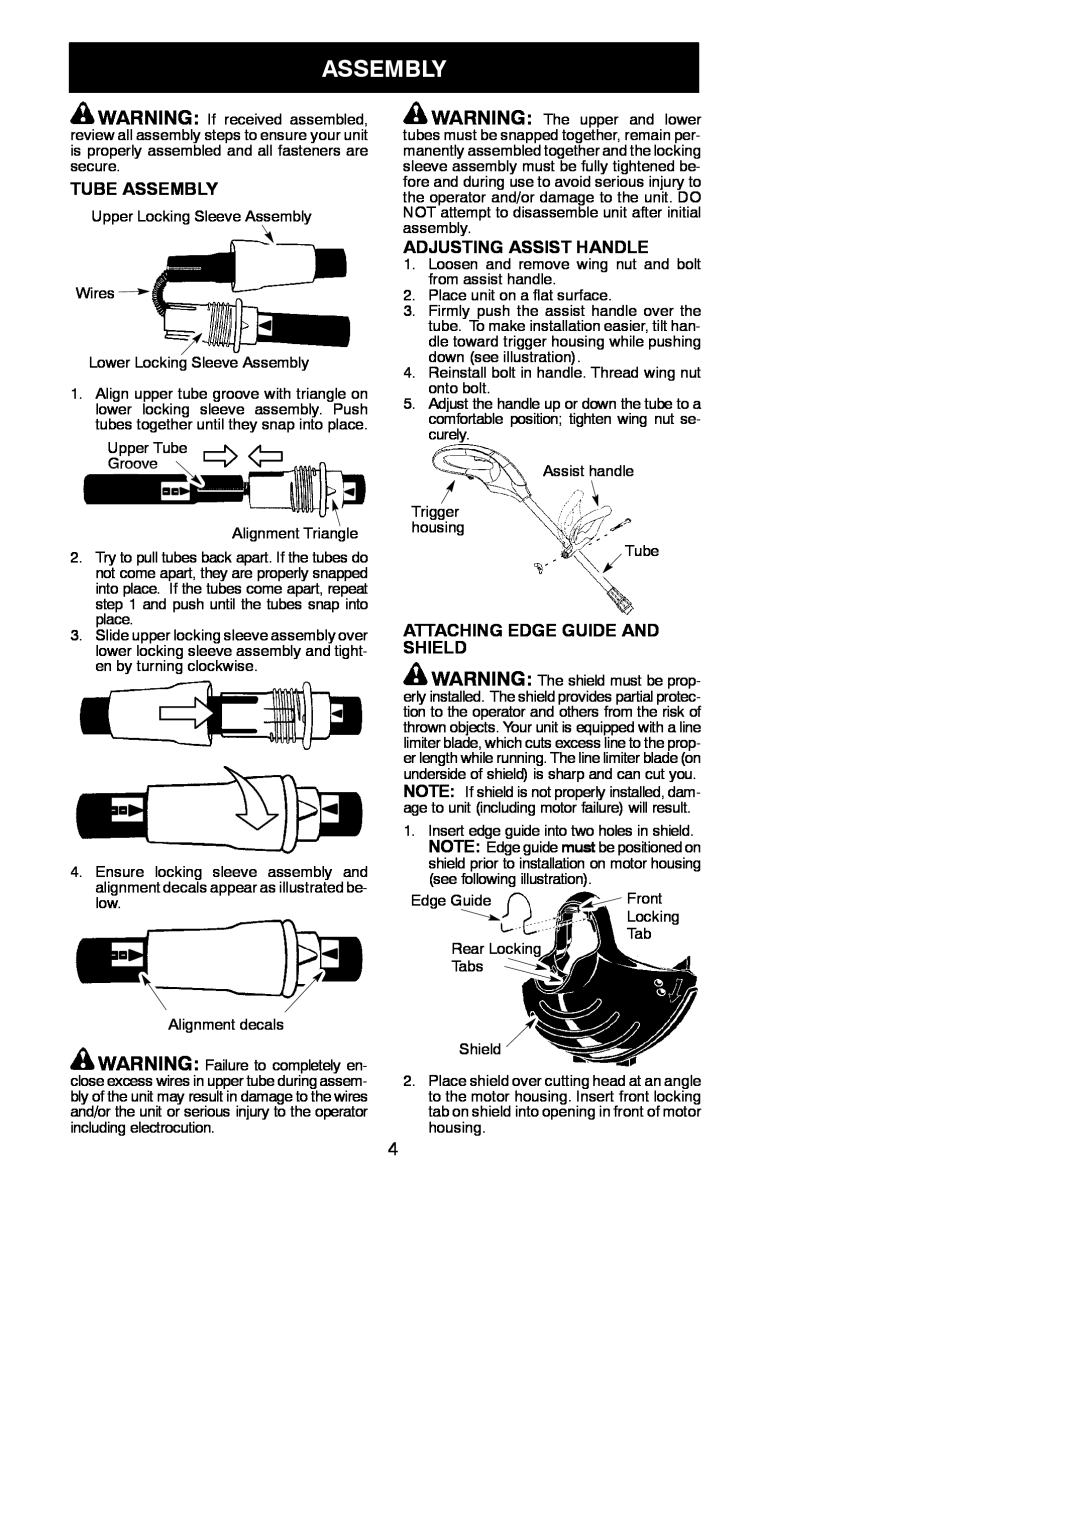 Weed Eater 952711866 instruction manual Tube Assembly, Adjusting Assist Handle, Attaching Edge Guide And Shield 